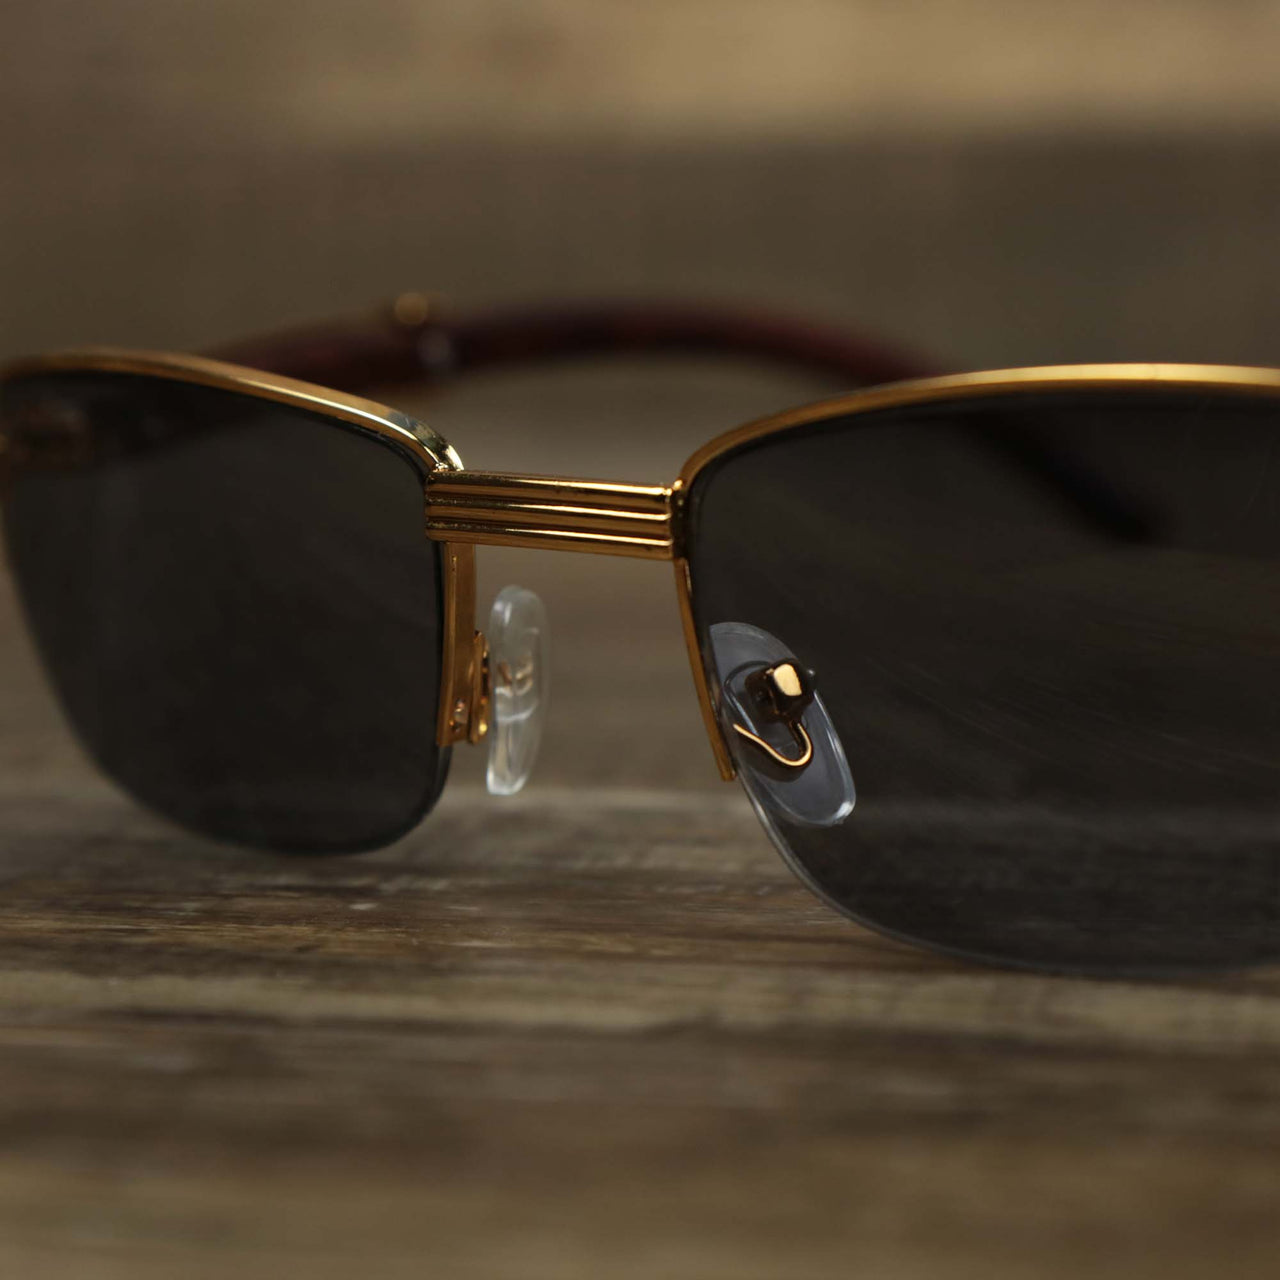 The bridge on the Rectangle 3 Row Frame Black Lens Sunglasses with Gold Frame